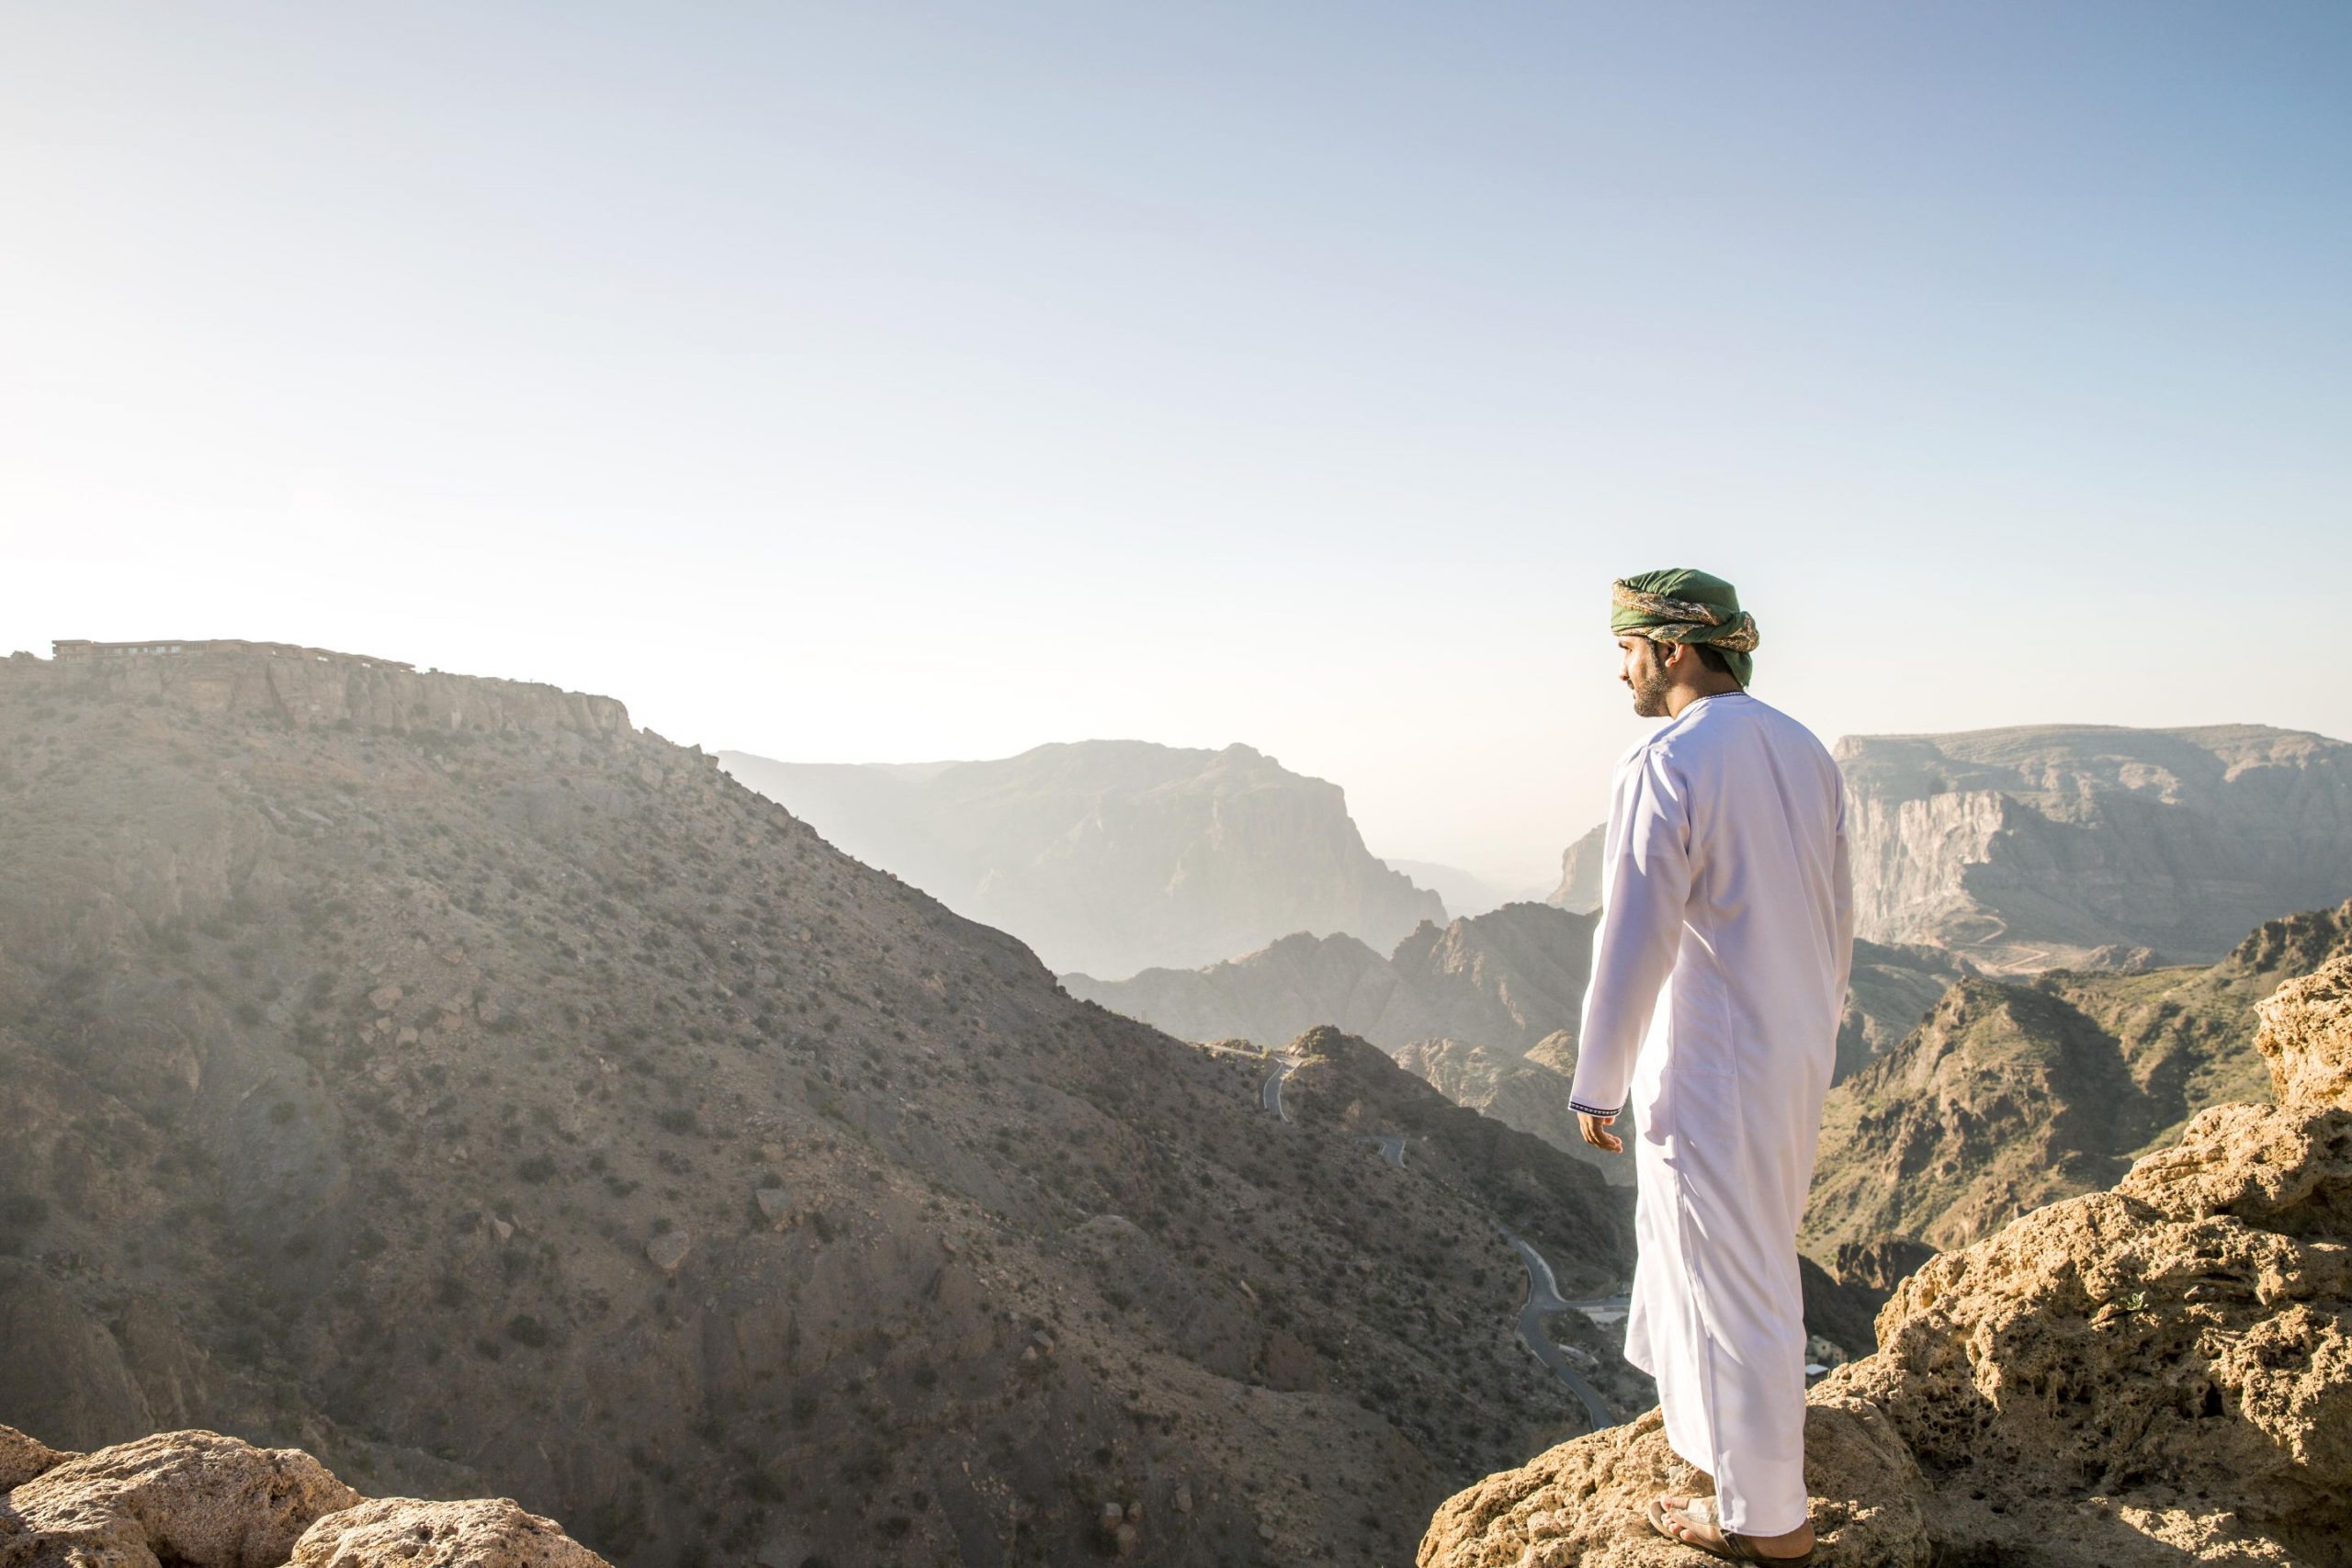 A visit to the two Anantara resorts of Oman and their striking surroundings is a chance to step back in time to the Arabia of old.